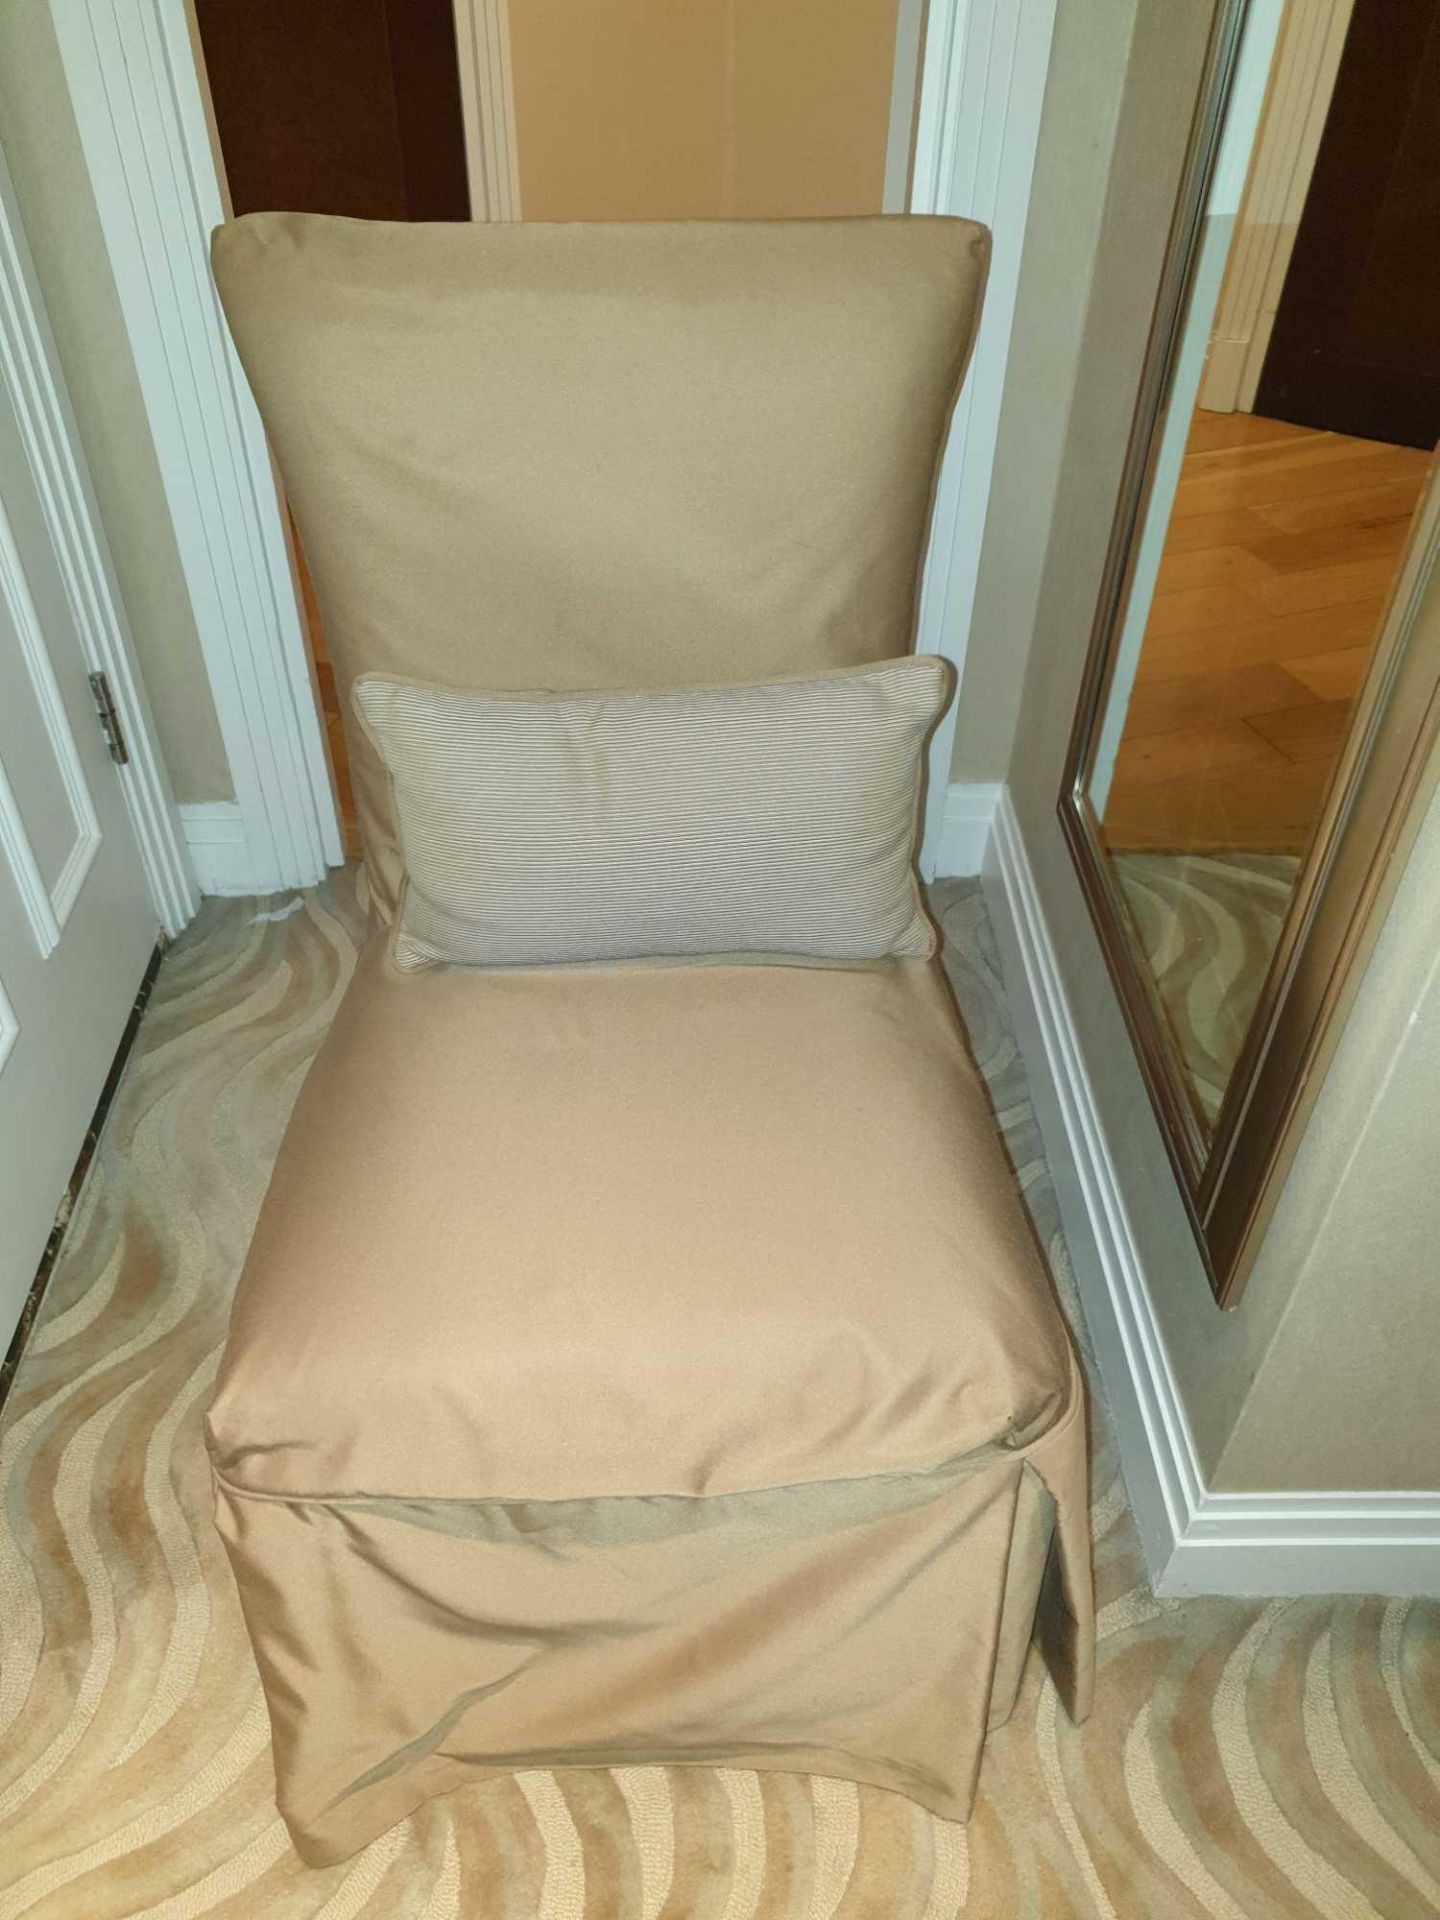 Dressing Chair With Gold Fitted Cover 53cm Width 44cm Depth 89cm High ( Loc 409)